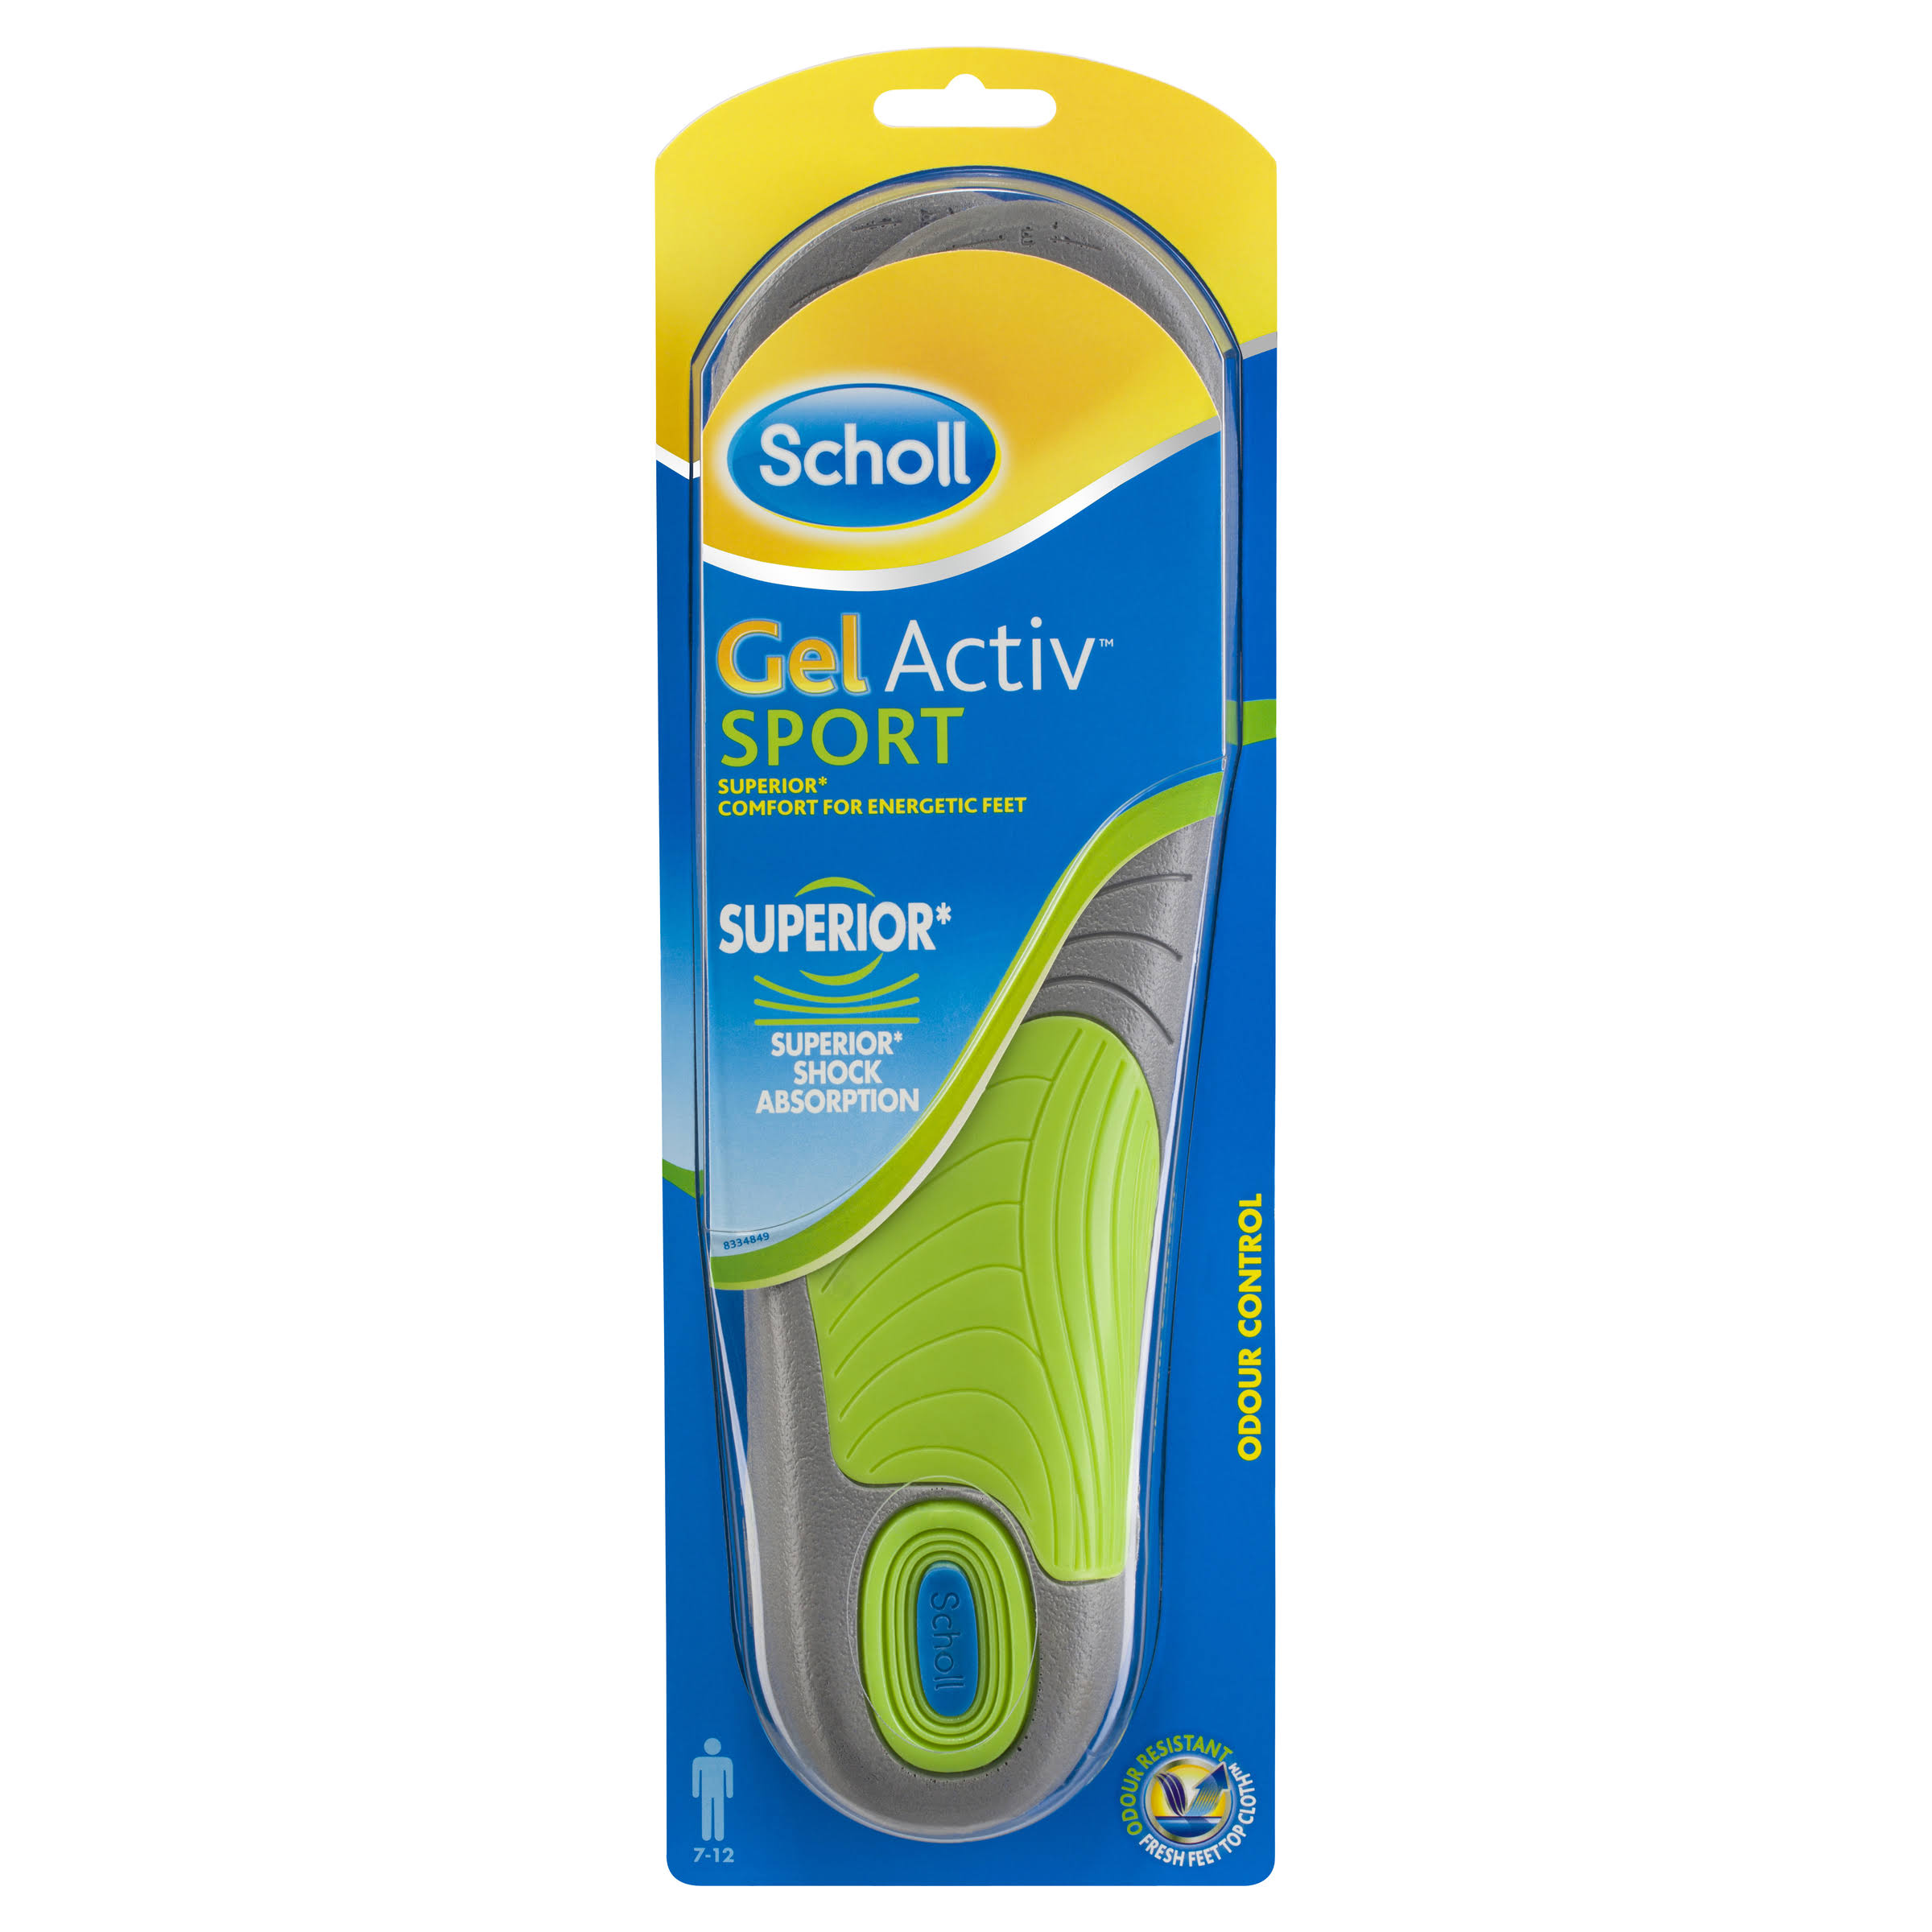 Scholl Men's Gel Activ Sport Insoles - Blue, Yellow and White